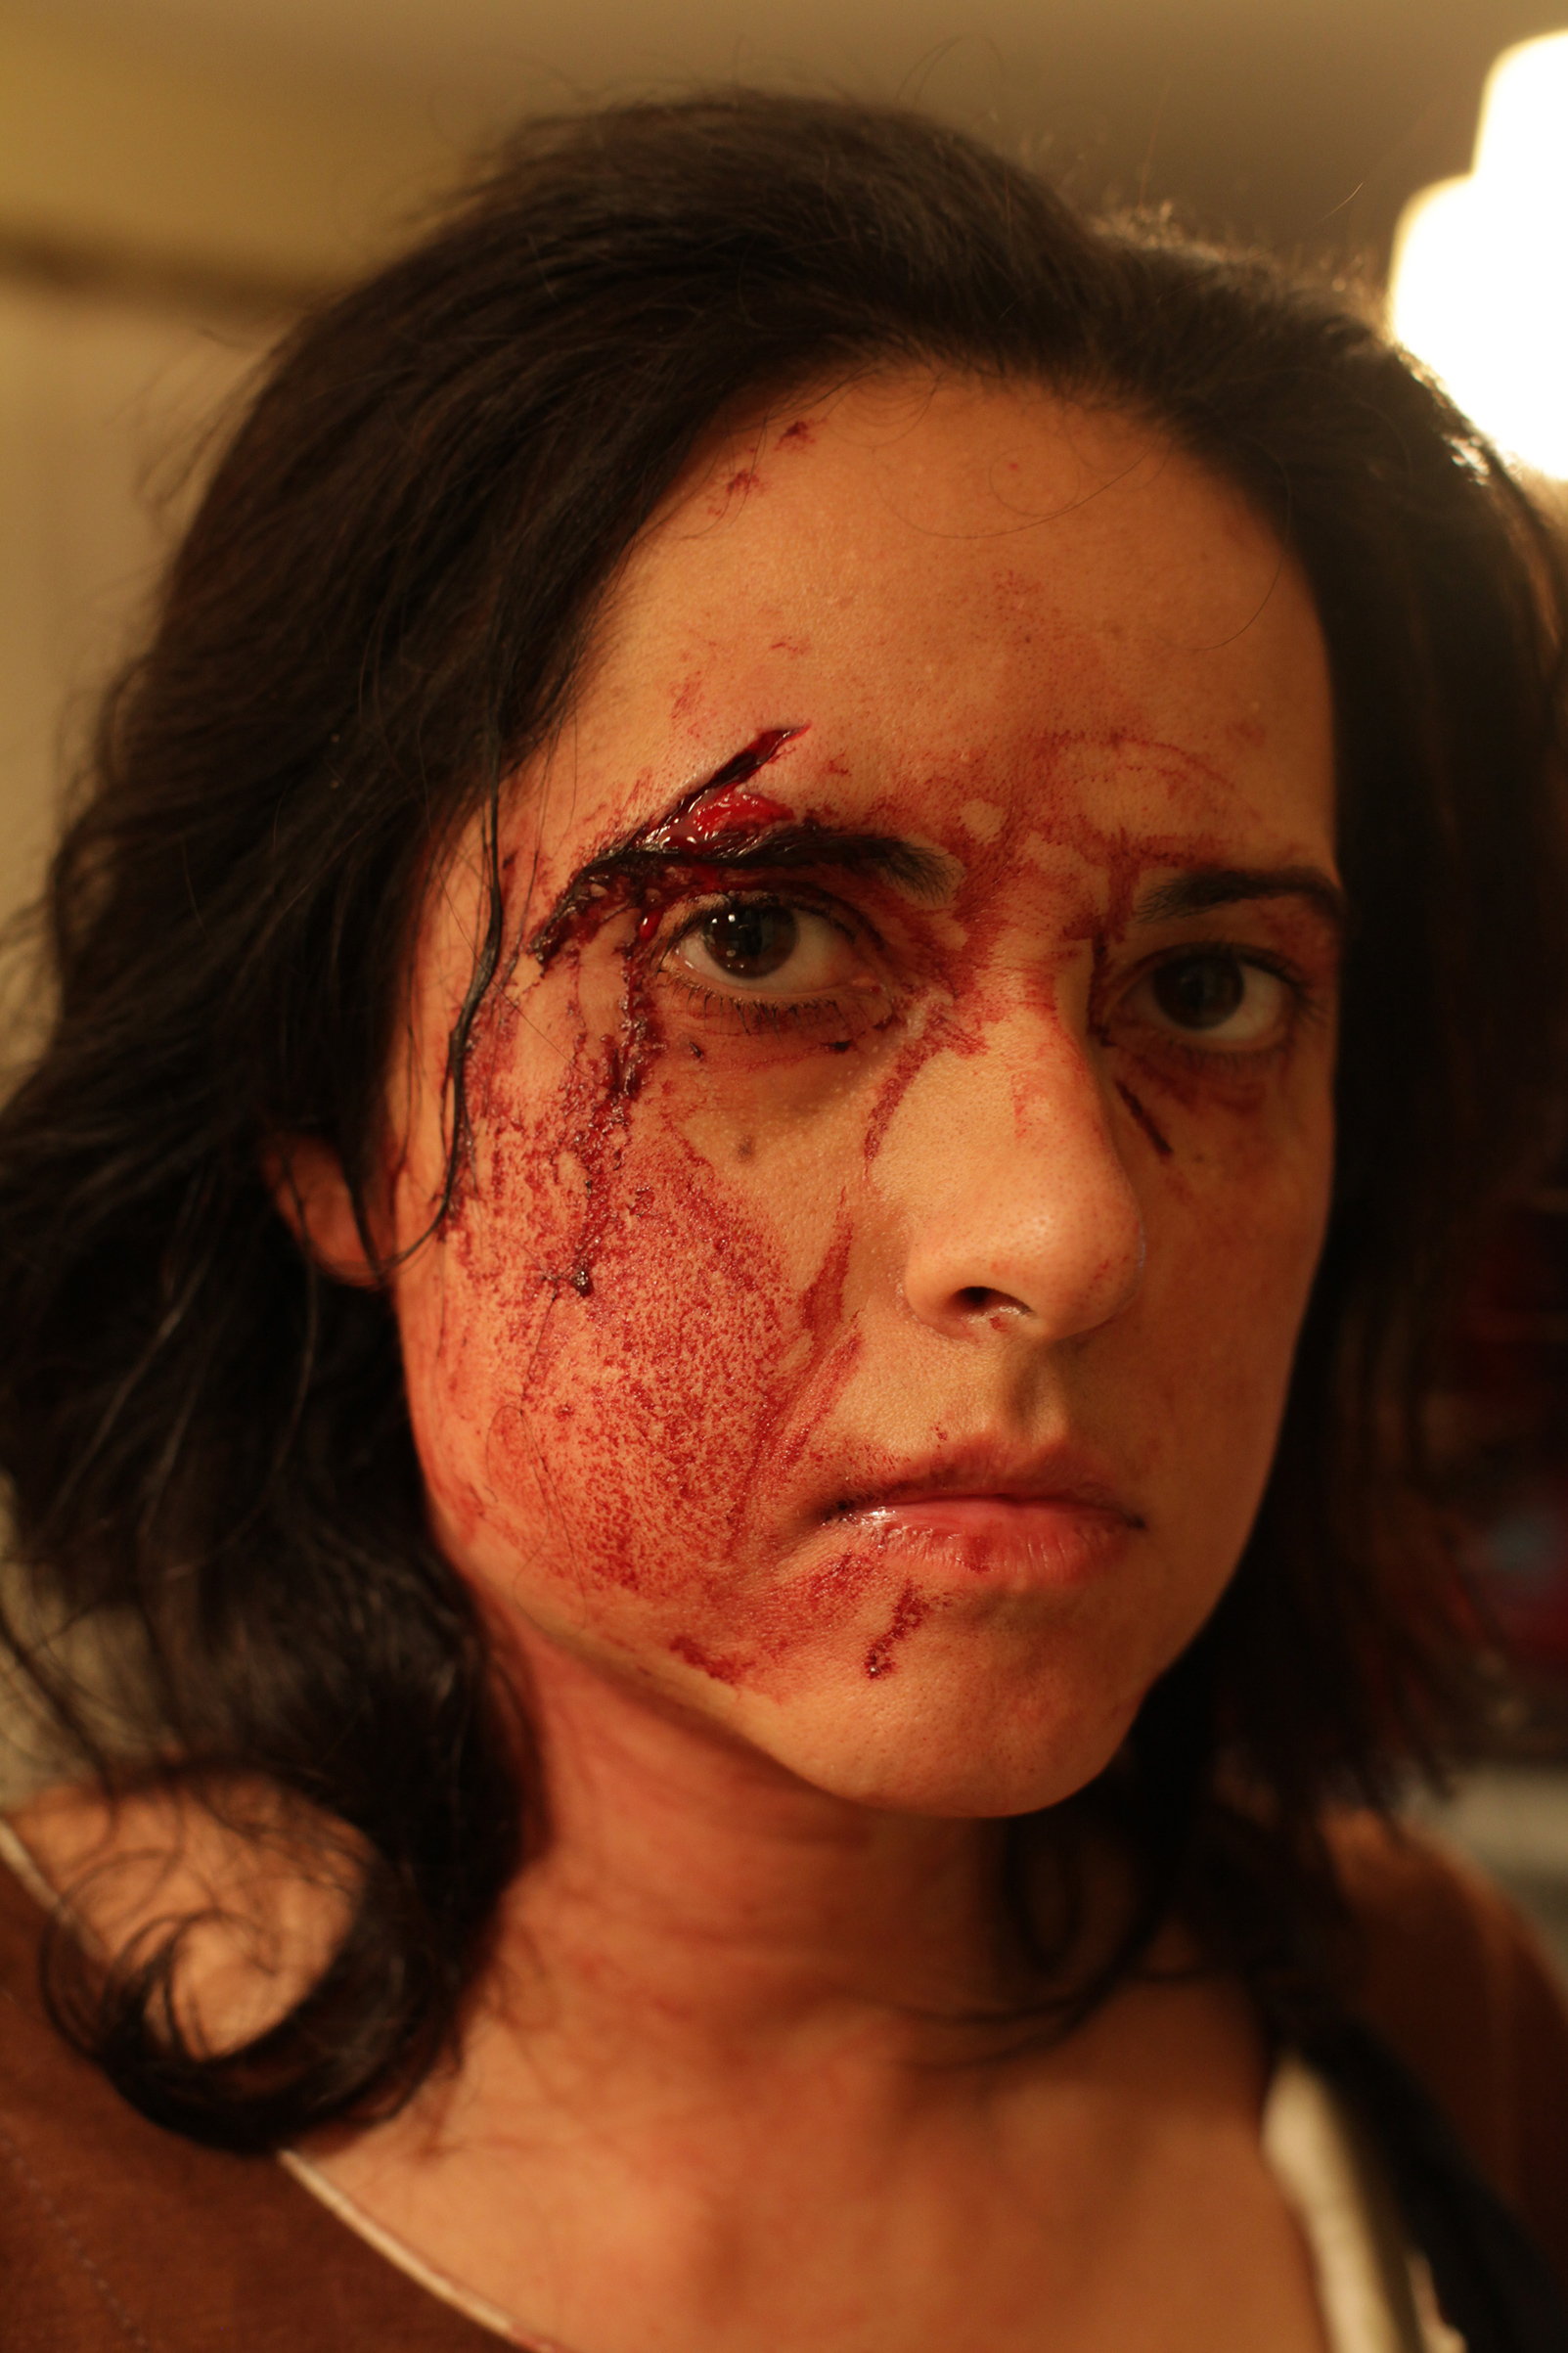 A self portrait by photojournalist Rena Effendi taken after an attack on March 9, 2012. (Rena Effendi)